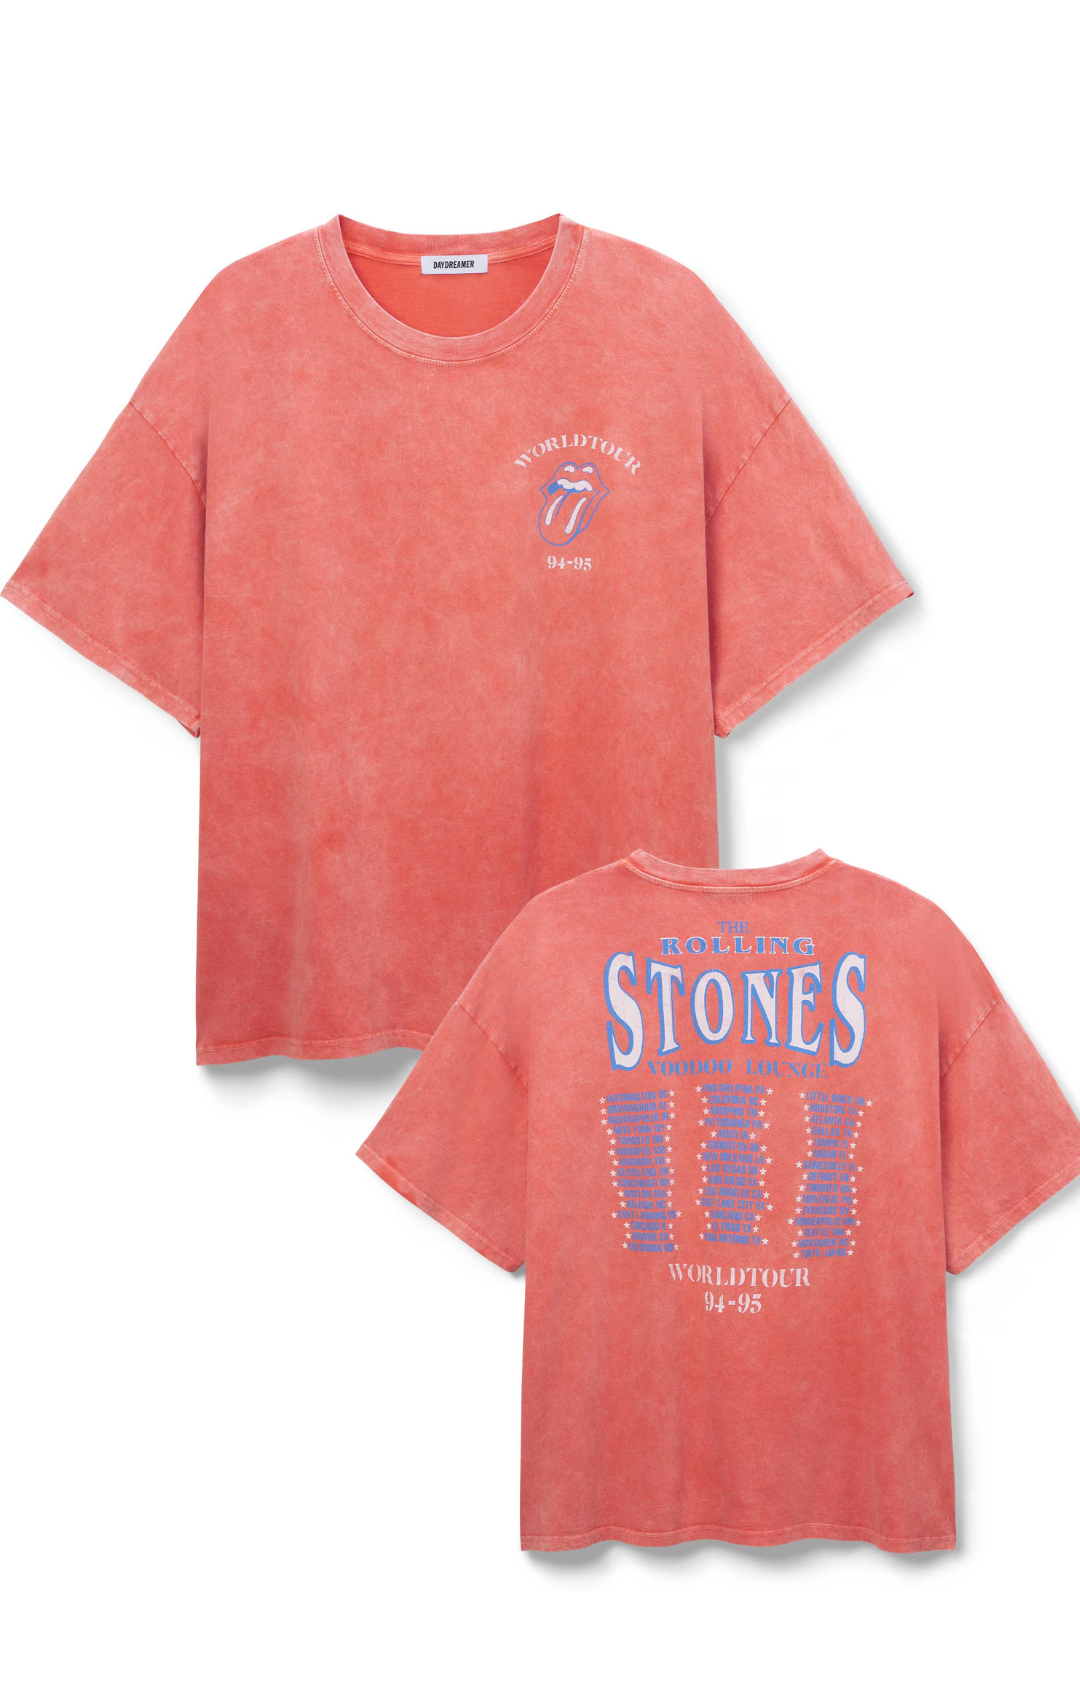 Rolling Stones World Tour 94-95 OS Tee by Daydreamer